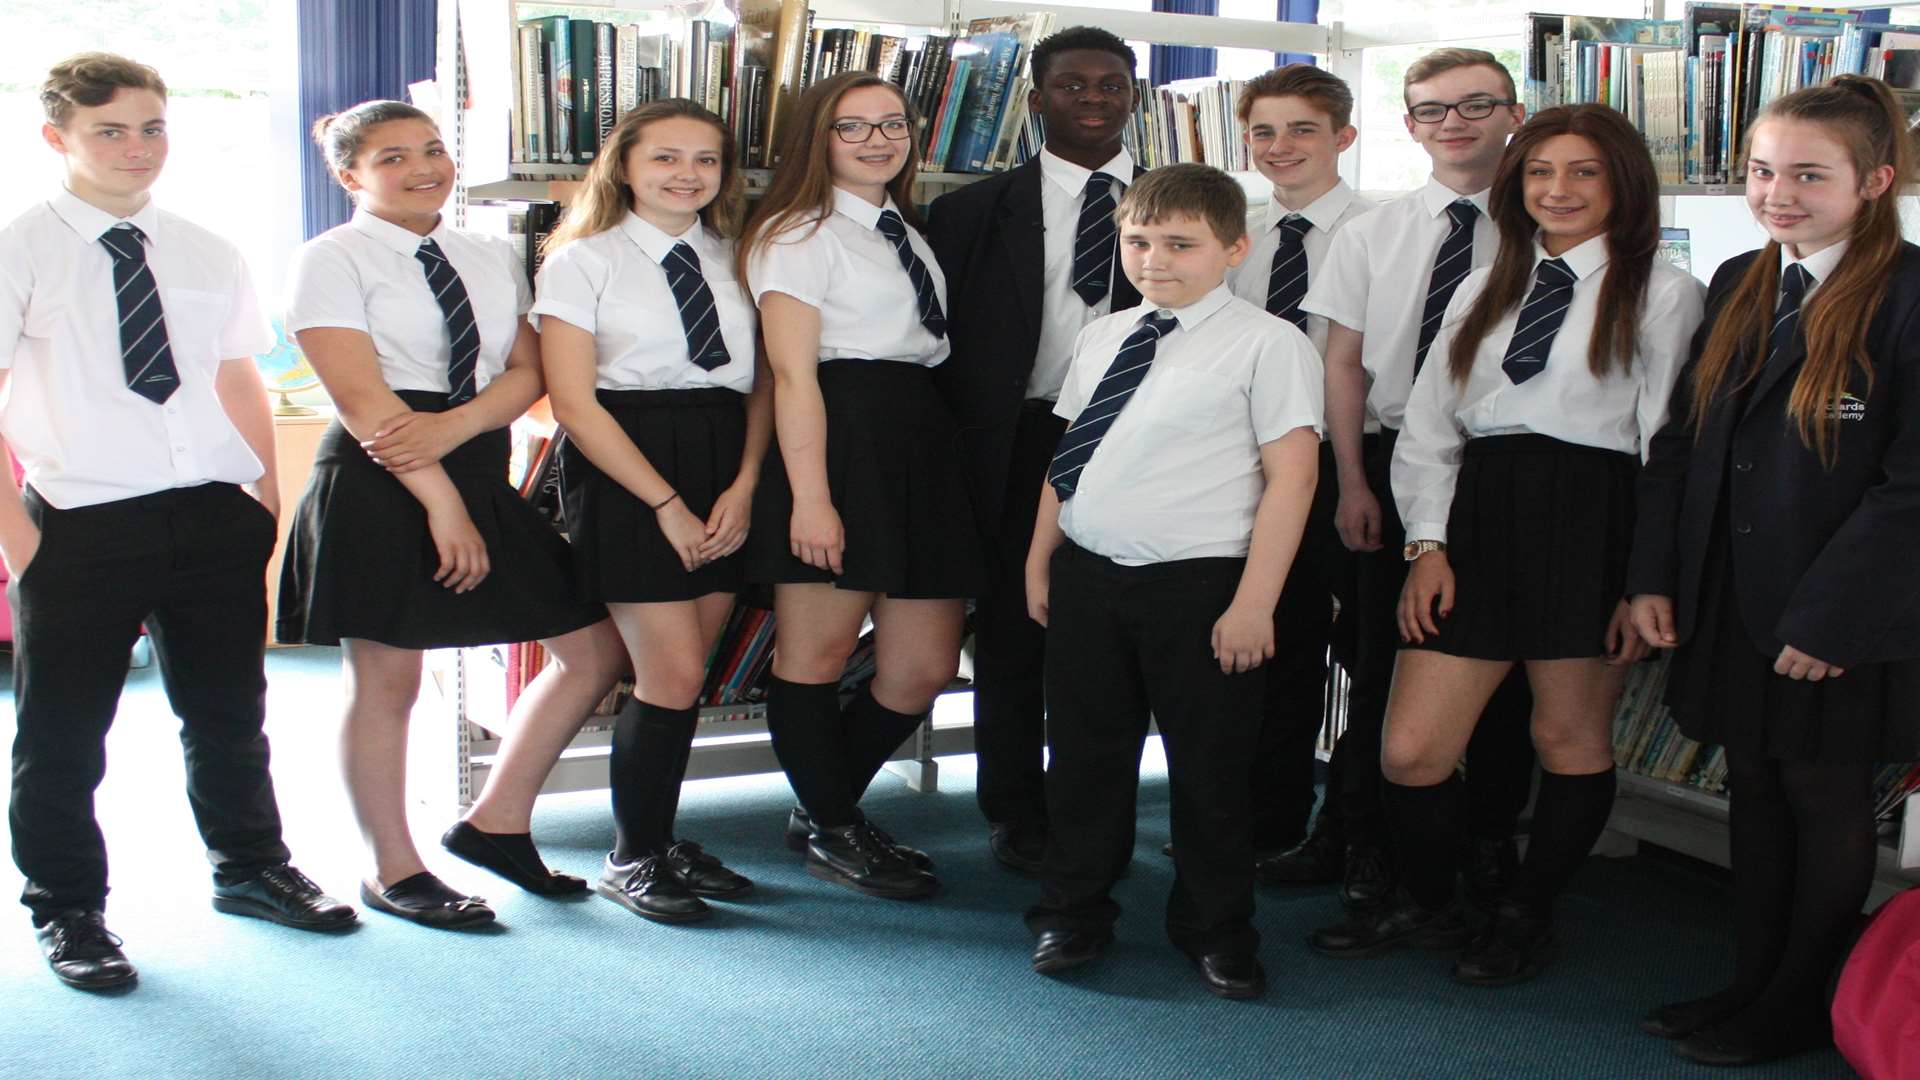 HeadStart trained peer mentors and active listeners at Orchards, left to right: Liam Giles, Millie Twyford, Lucy Booker, Millie Page, Mojere Adeyemo, Charlie Attaway, Alex Bryant, Grace Heron, Libby Fox and Luke Yates in the front.